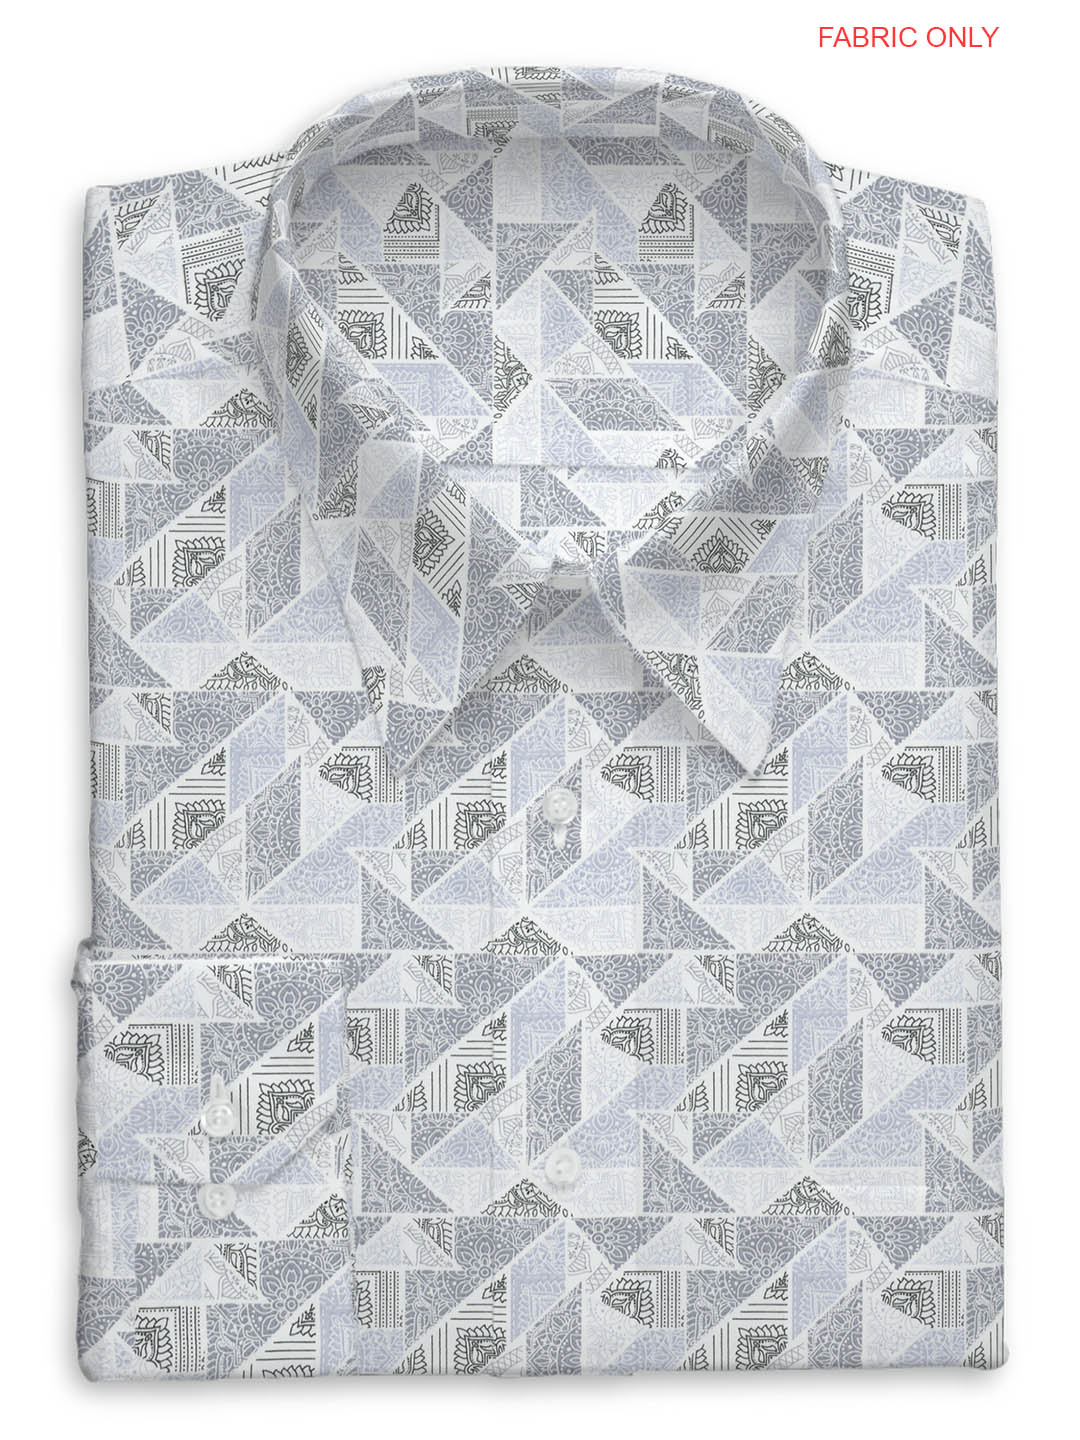 Cotton Blend White with Grey Colour All-over Print Shirt Fabric OSLO